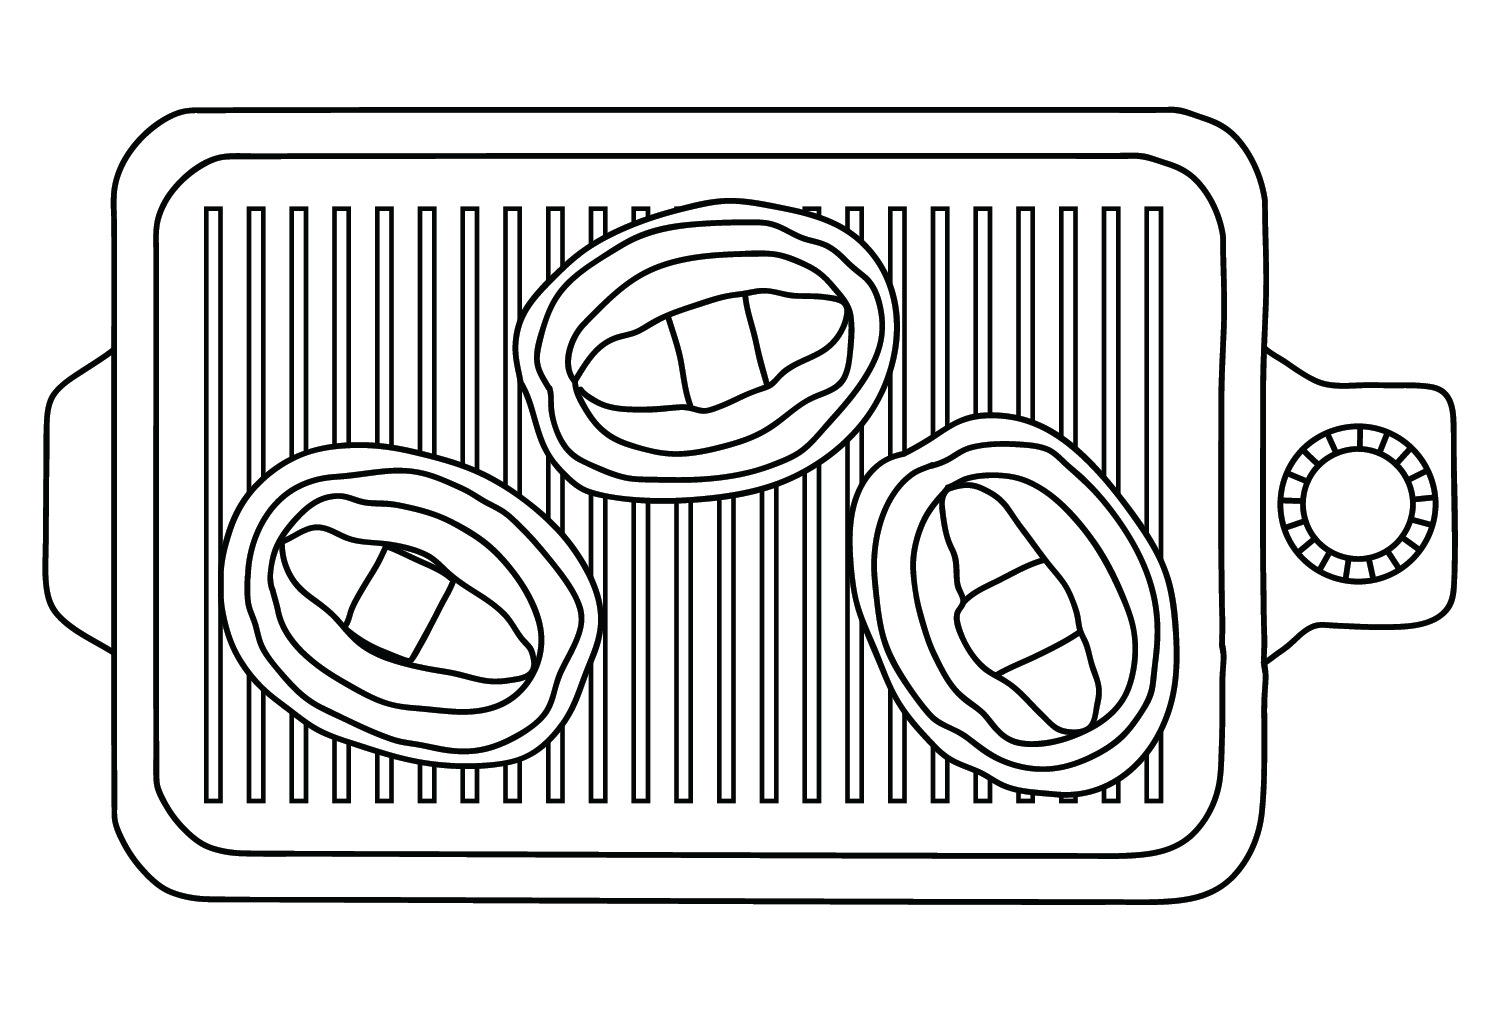 Grilled Abalone Coloring Page from Abalone